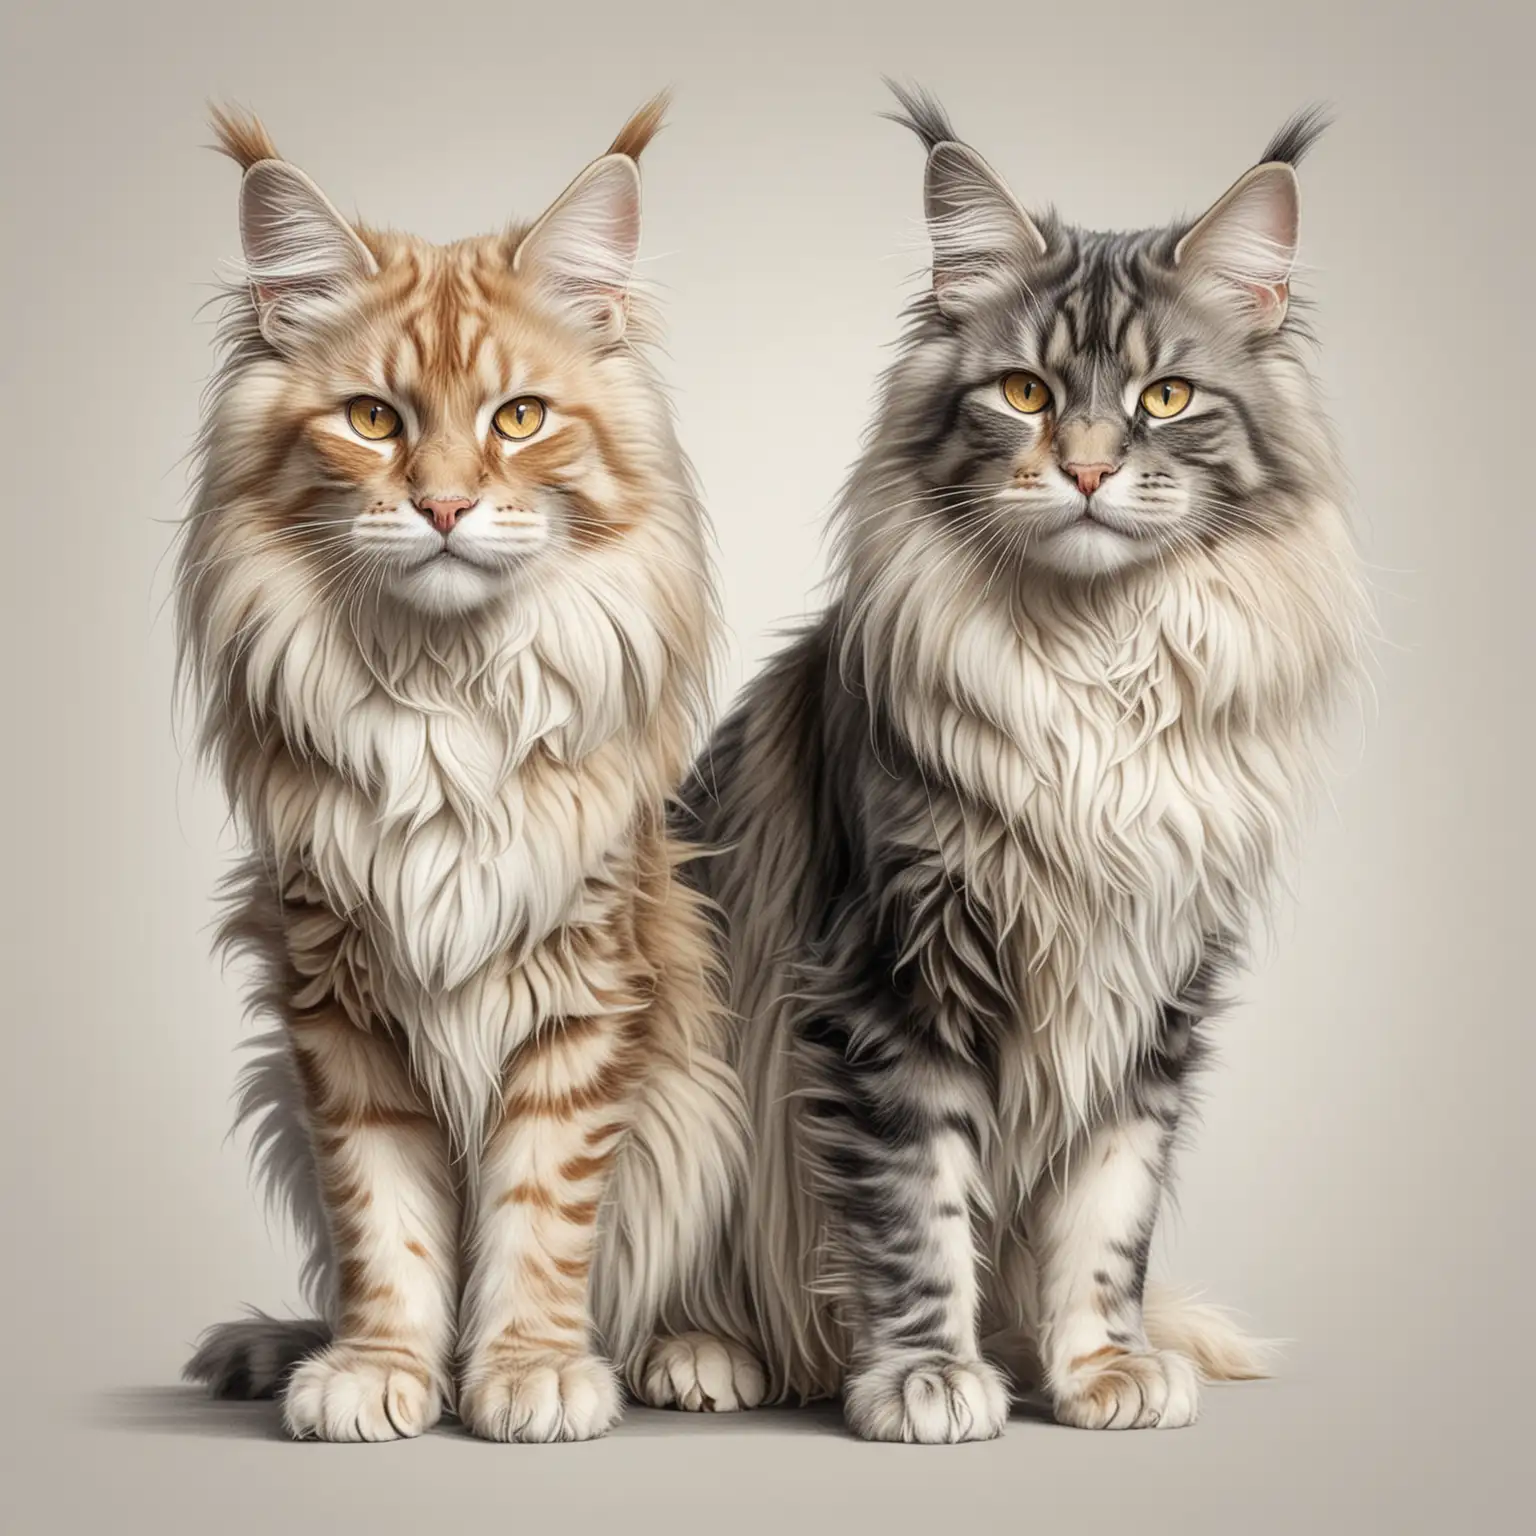 Realistic-Pencil-Drawing-of-Two-Maine-Coon-Longhair-Cats-Playing-on-White-Background